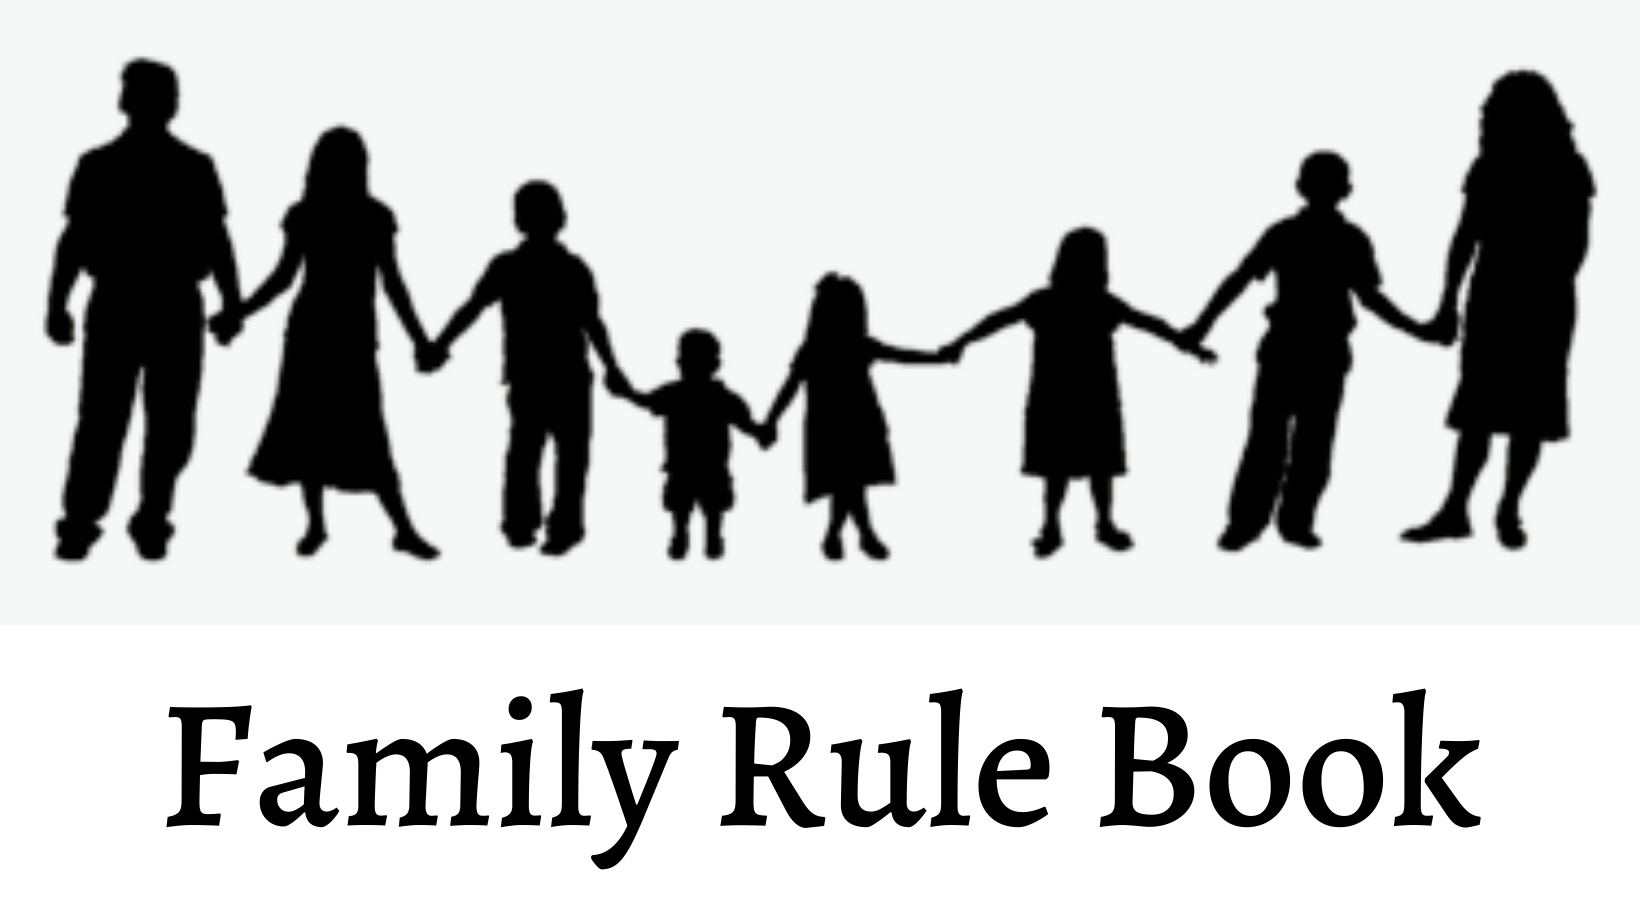 Why did we make a Family Rule Book? (Family Rule Book part 1)